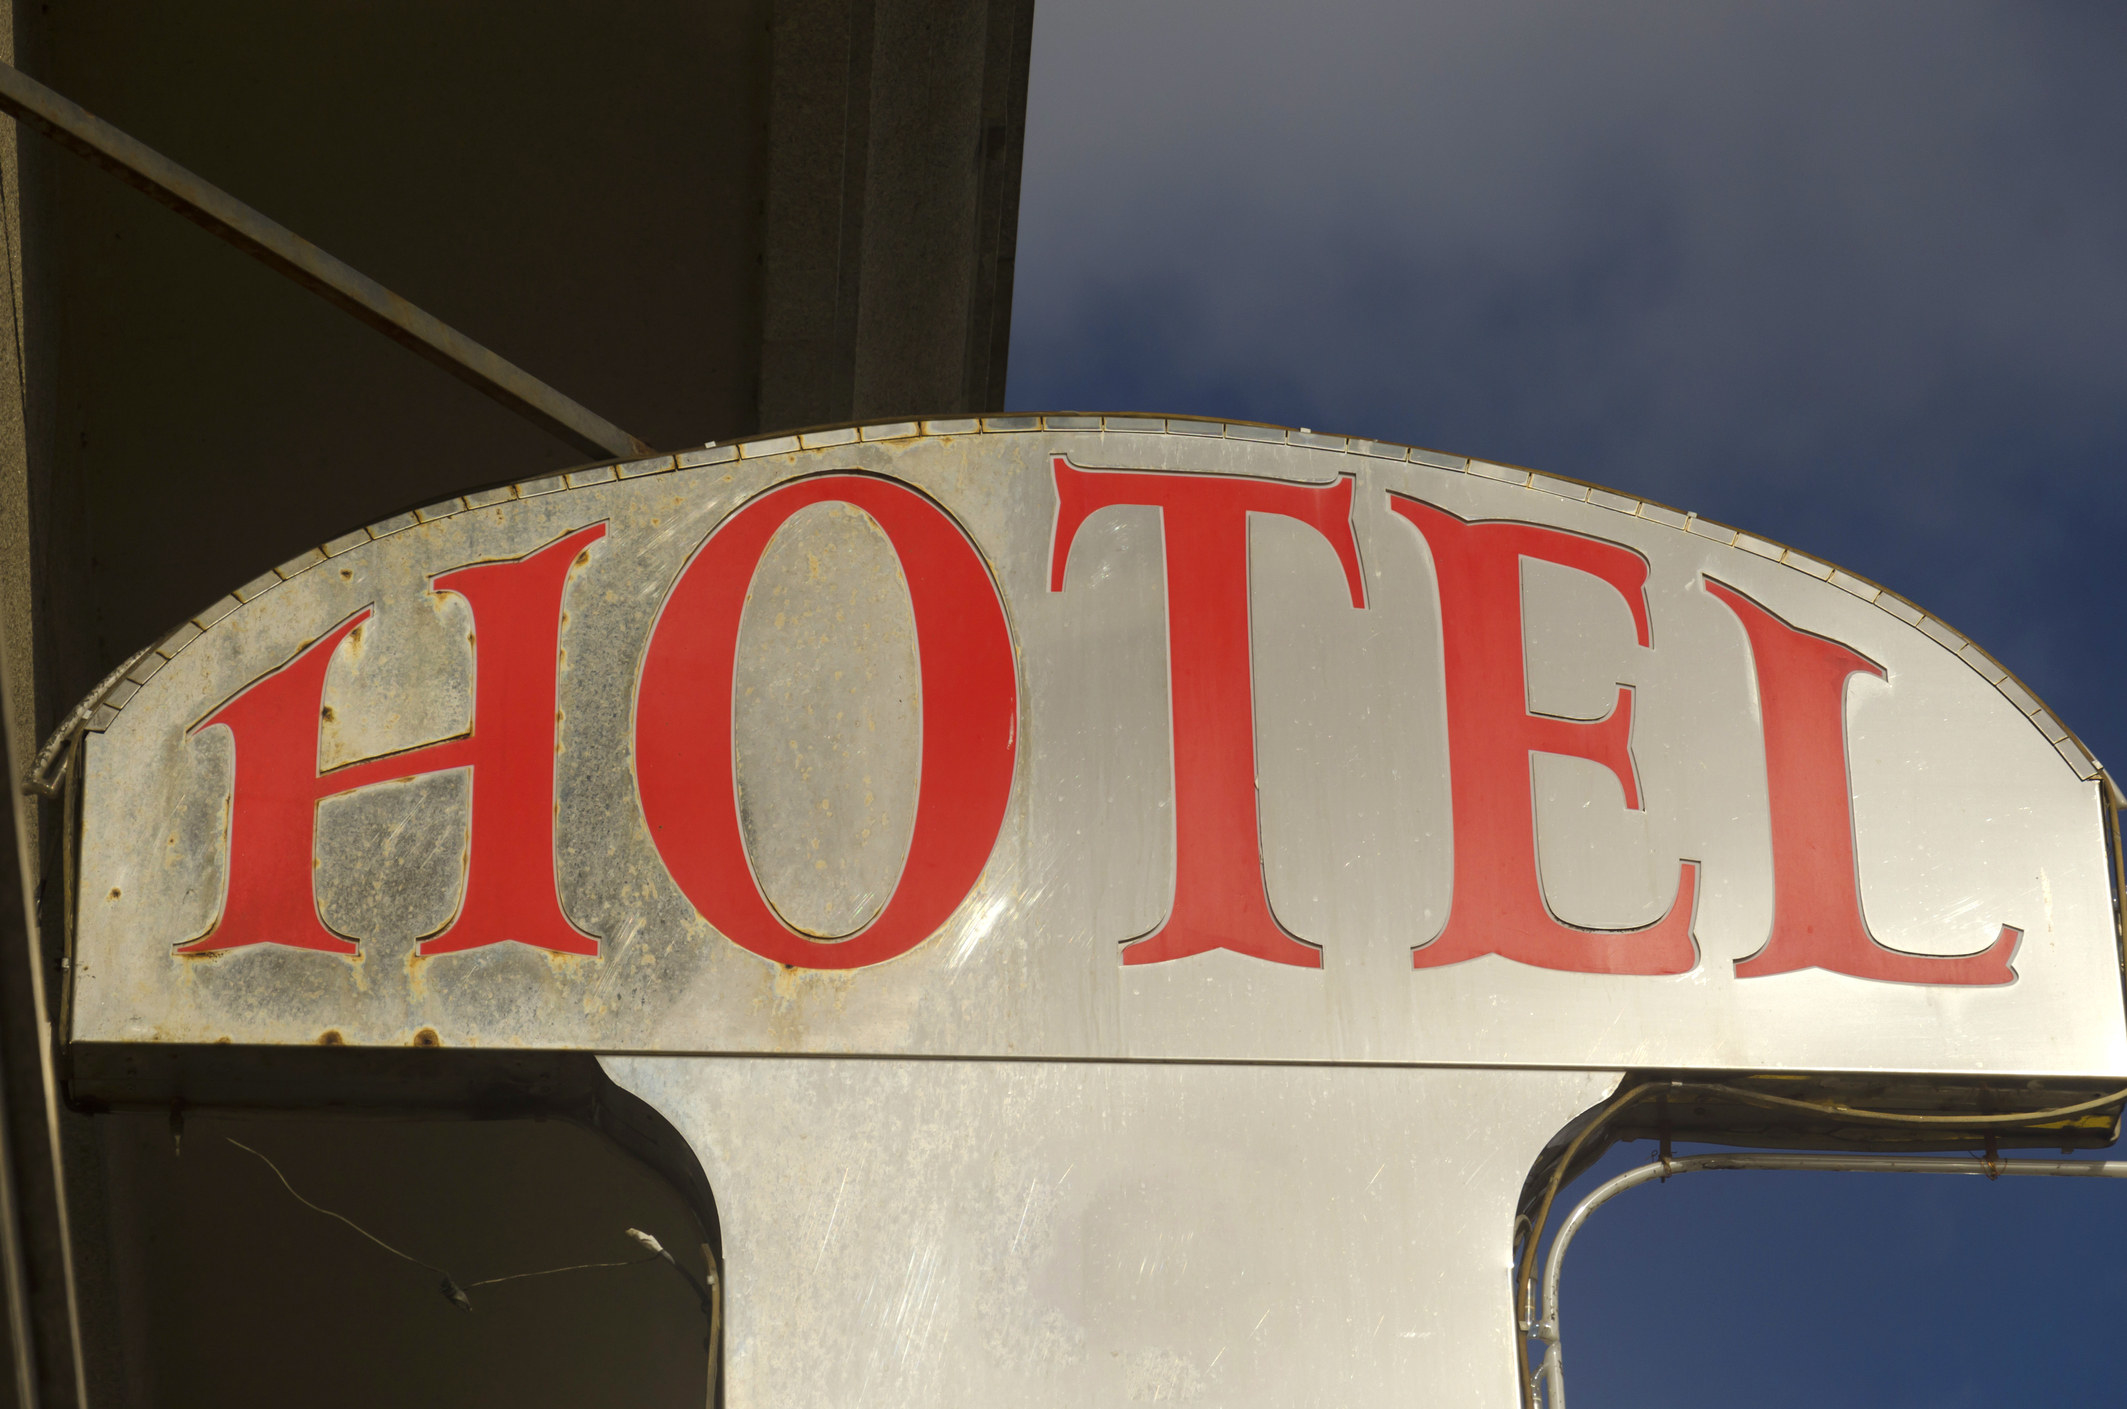 a vintage hotel sign at night